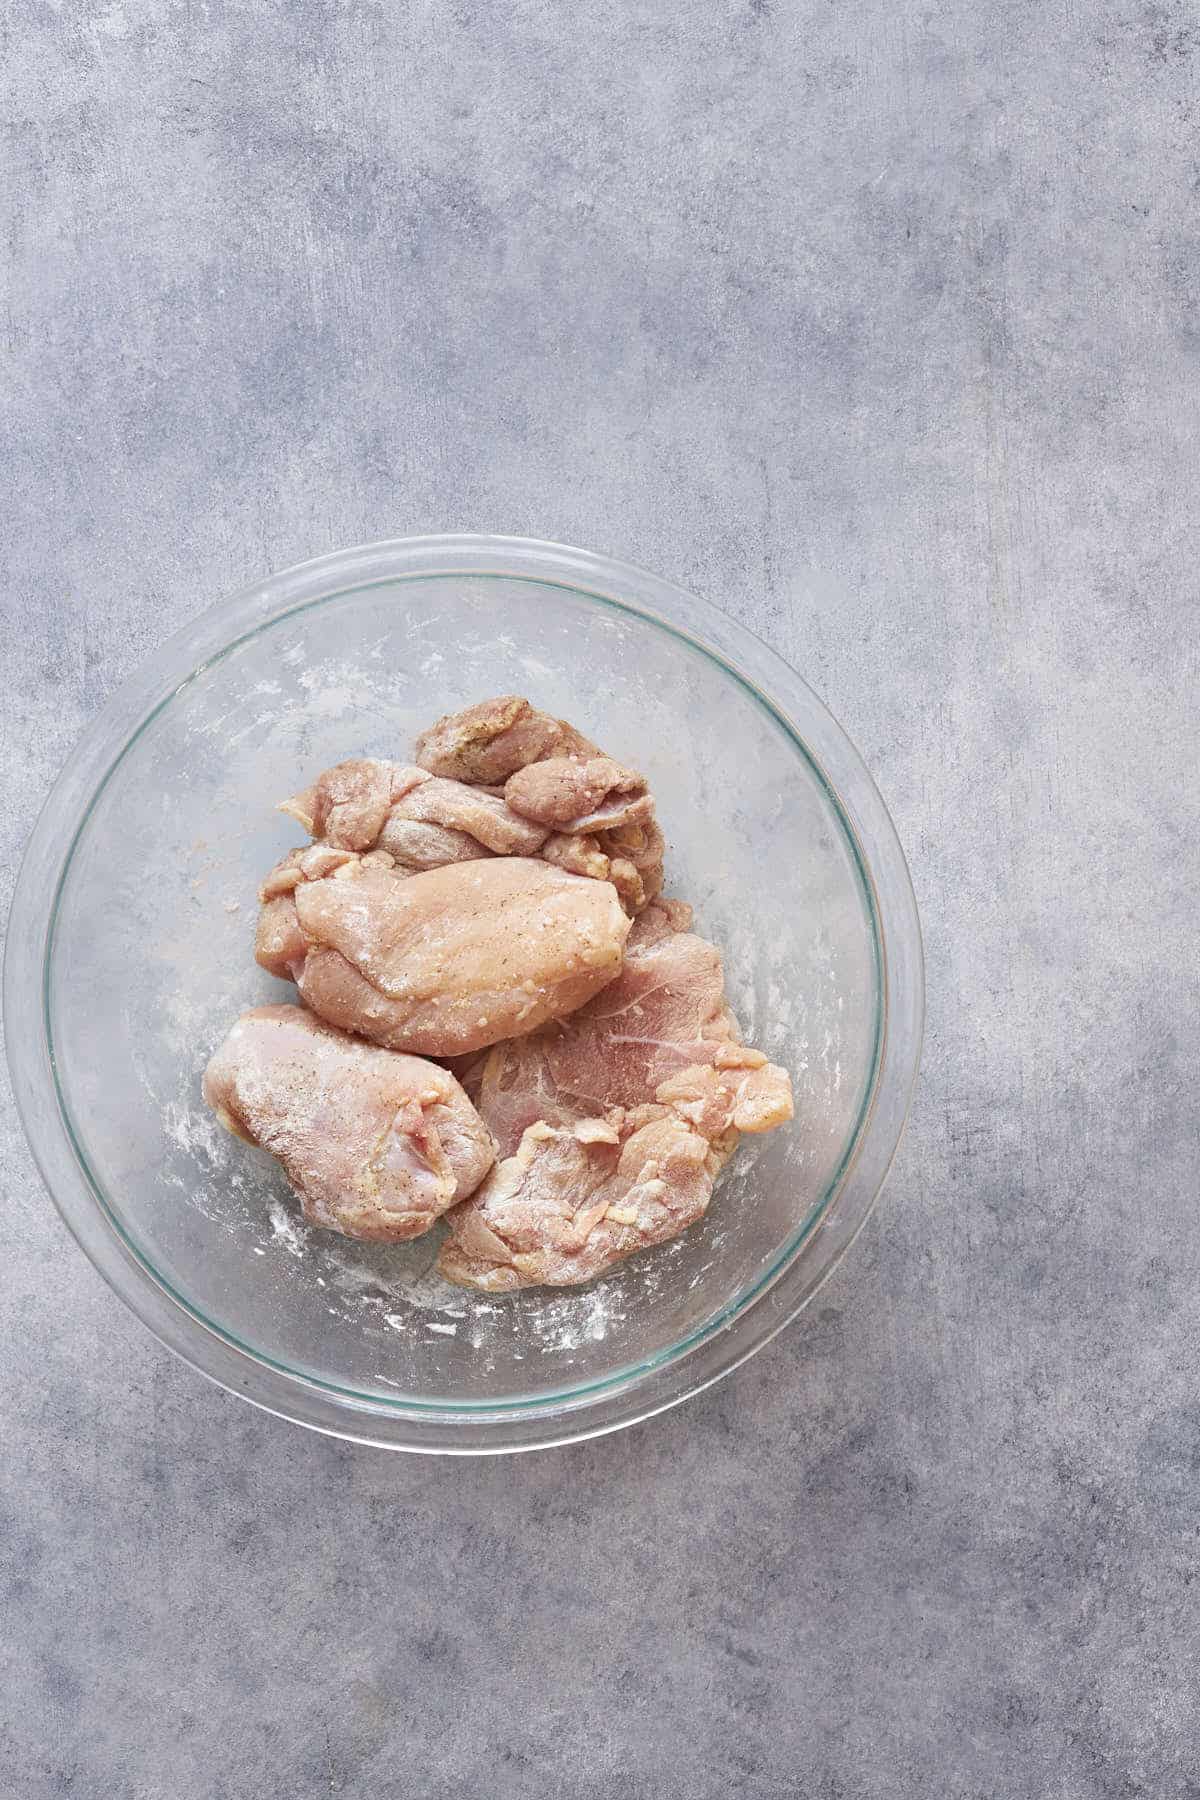 Chicken thighs seasoned with salt and pepper and coated with corn starch in a bowl.